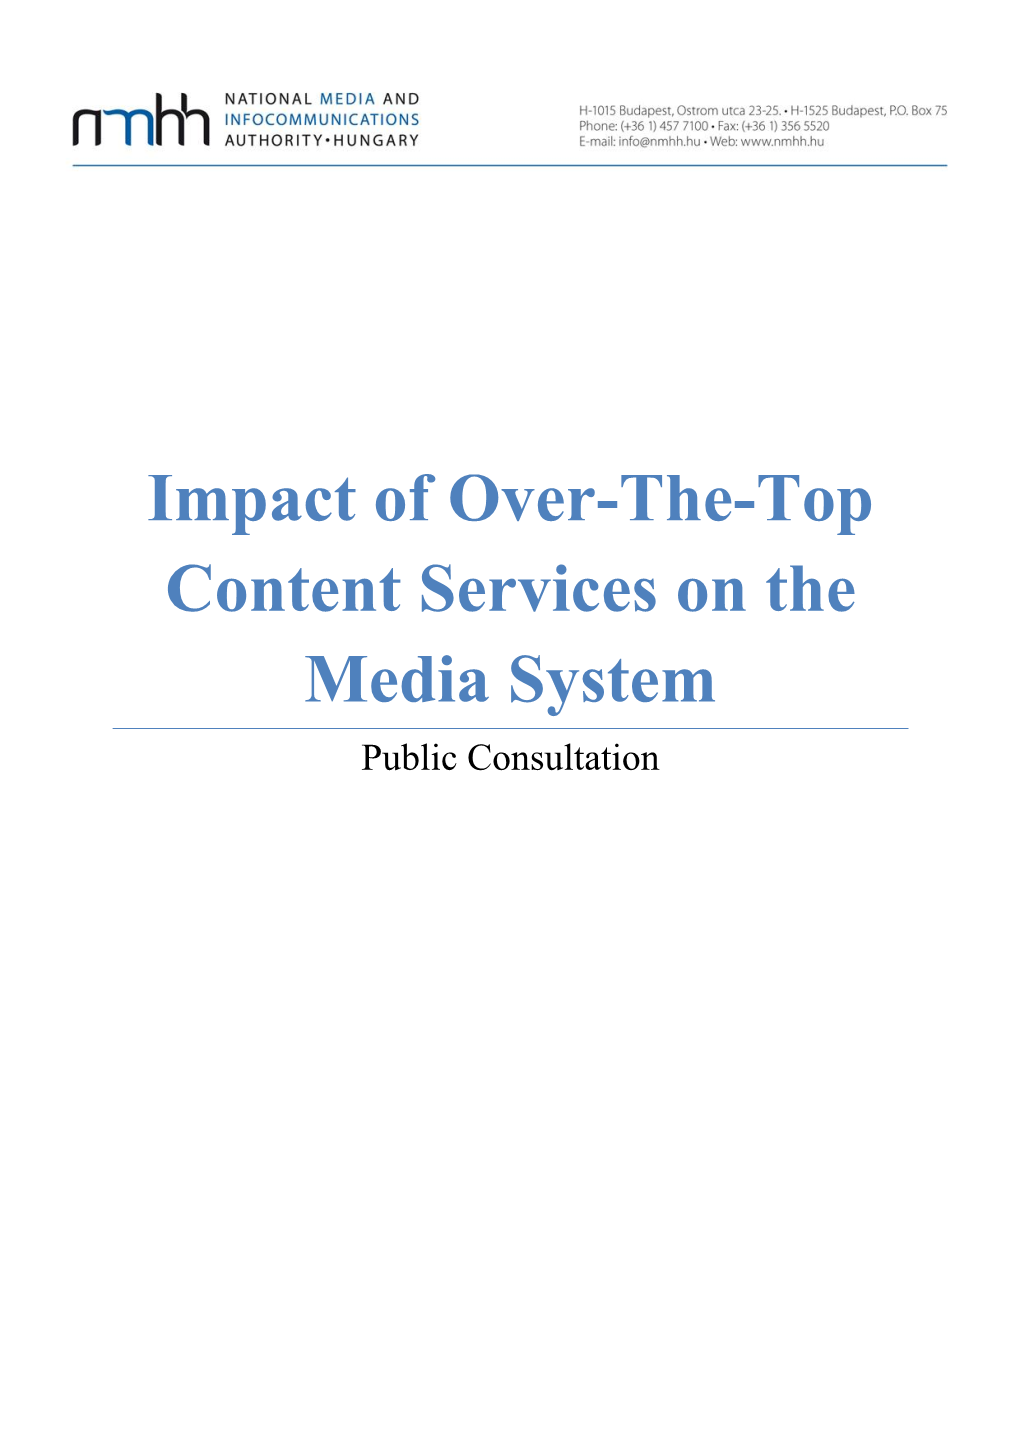 Impact of Over-The-Top Content Services on the Media System Public Consultation